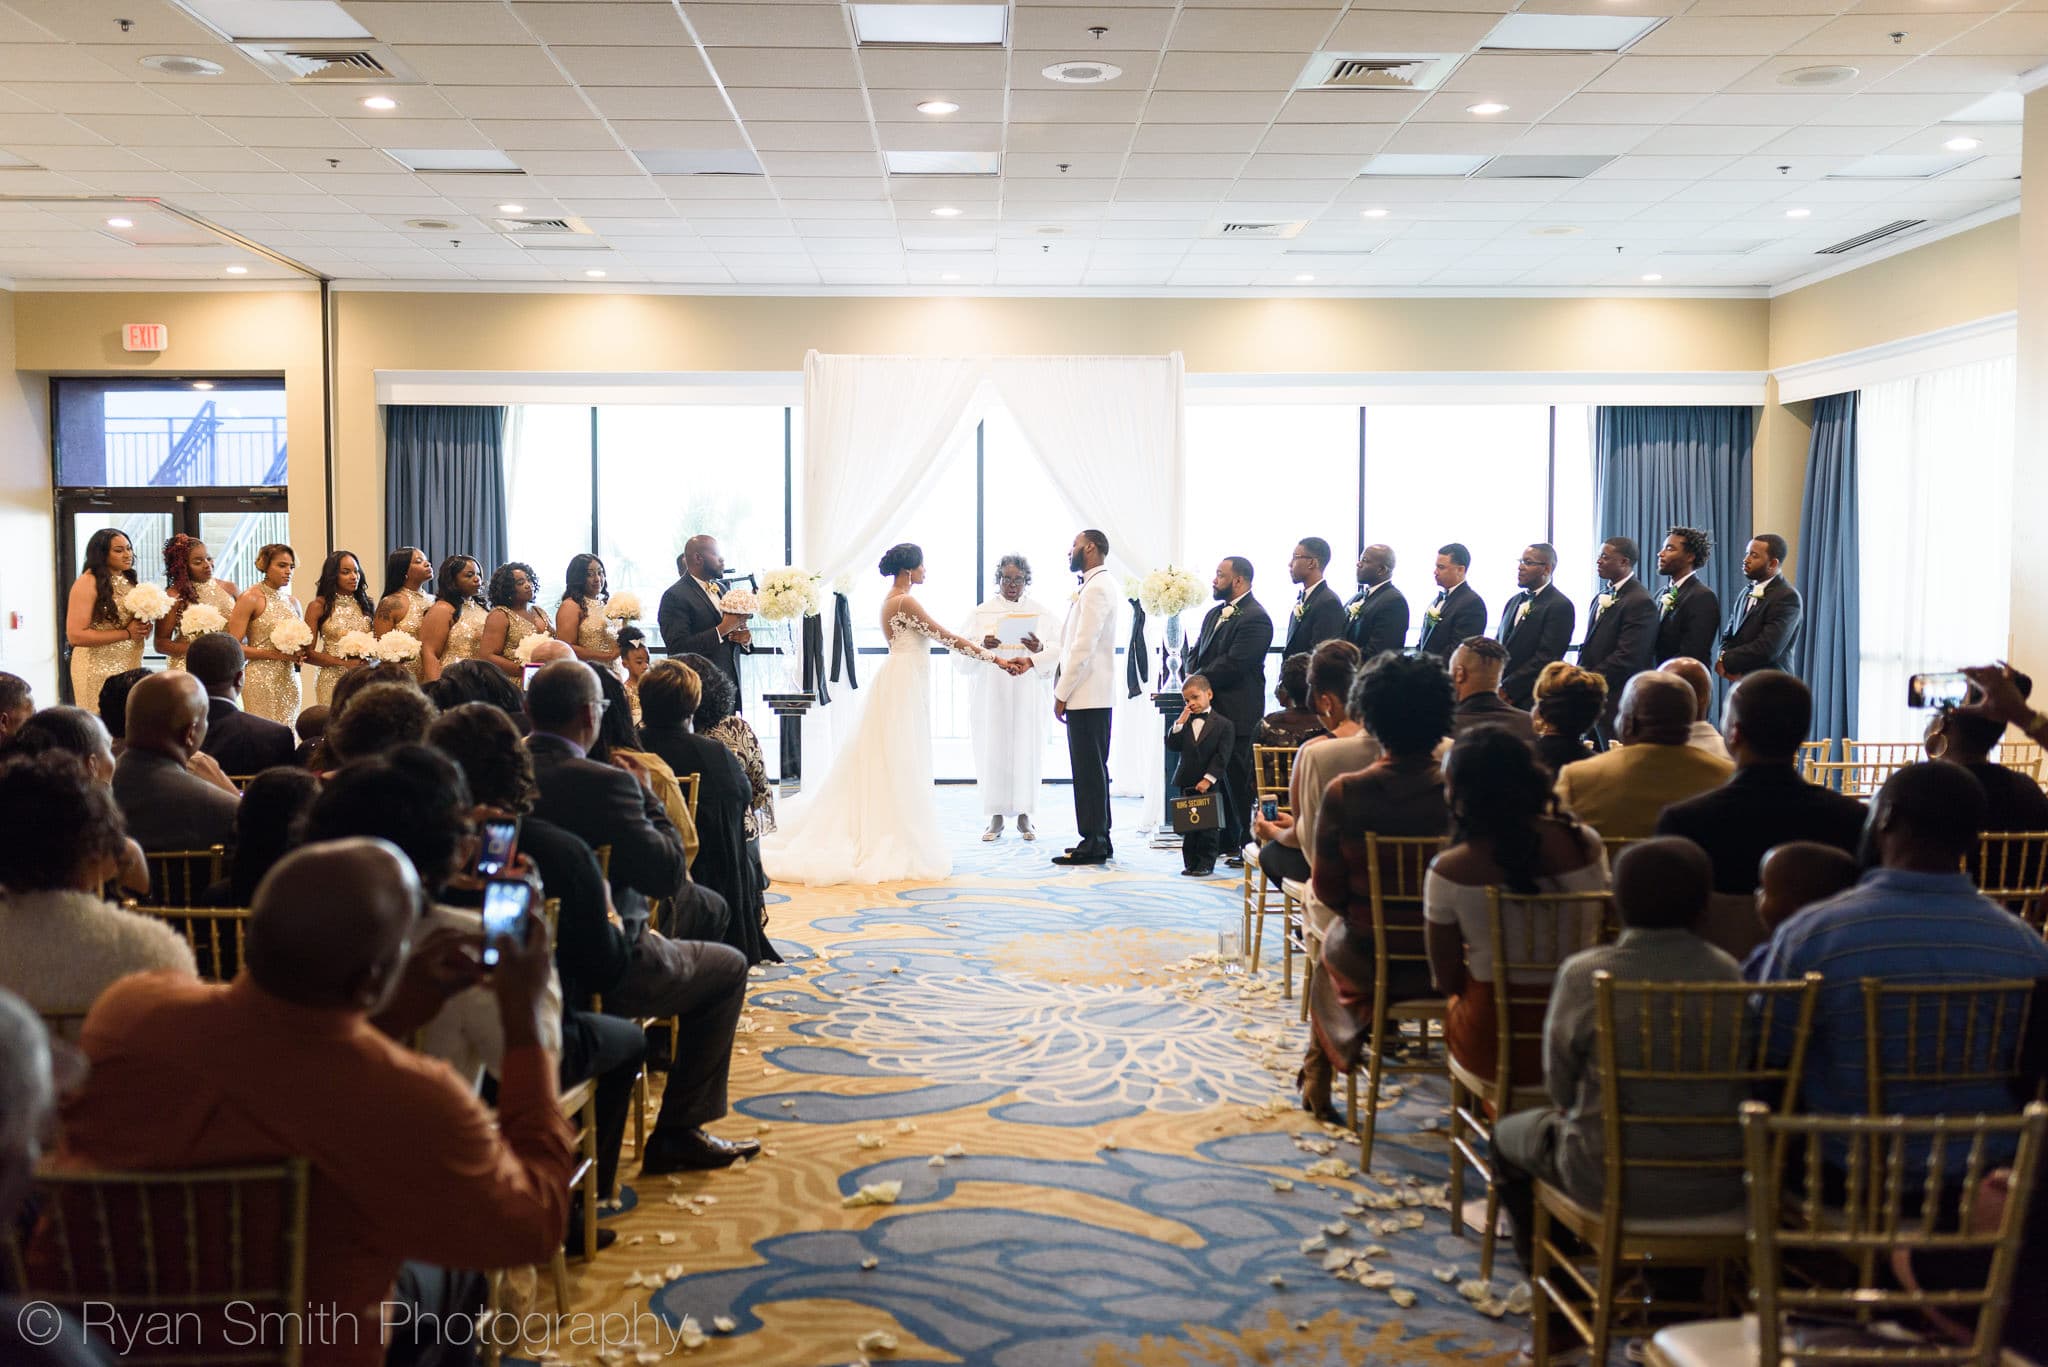 Ceremony in the ballroom - Doubletree Resort by Hilton Myrtle Beach